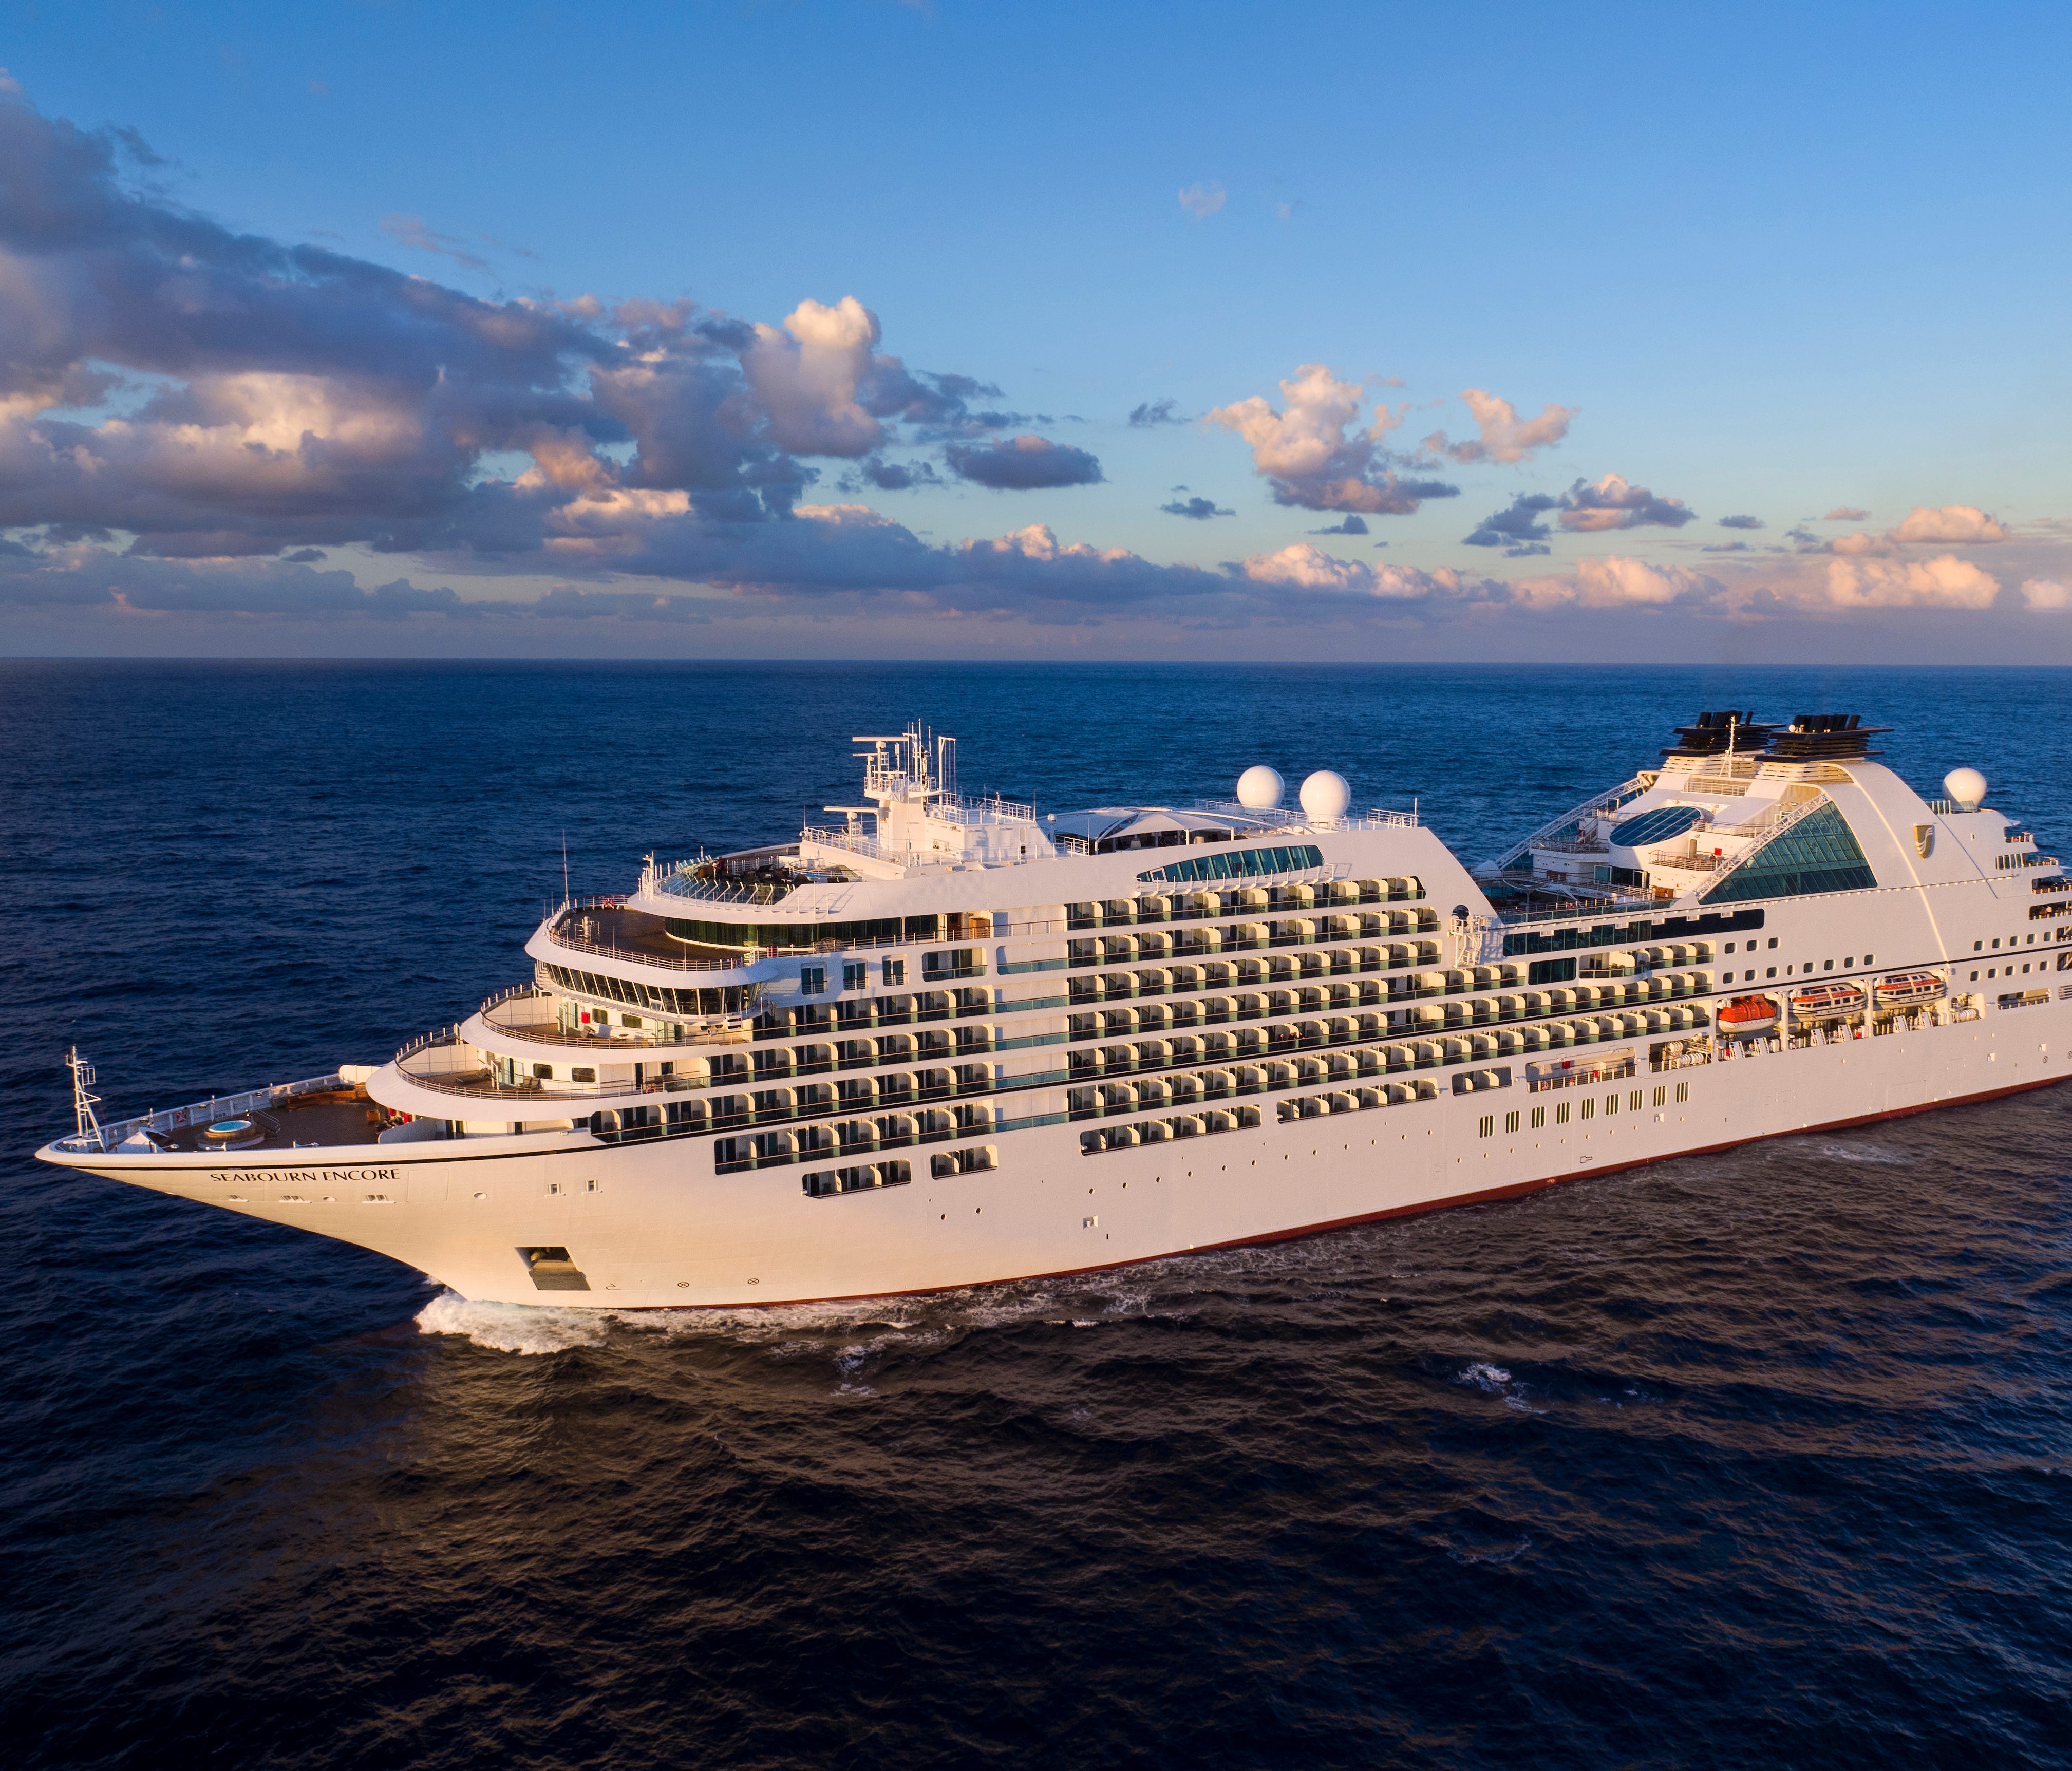 Seabourn Cruise Line's newest ship, Seabourn Encore, is more than twice as big as the older vessels the line sold to Windstar and carries nearly three times as many passengers. While sharing some exterior design features, it is much more boxy than it